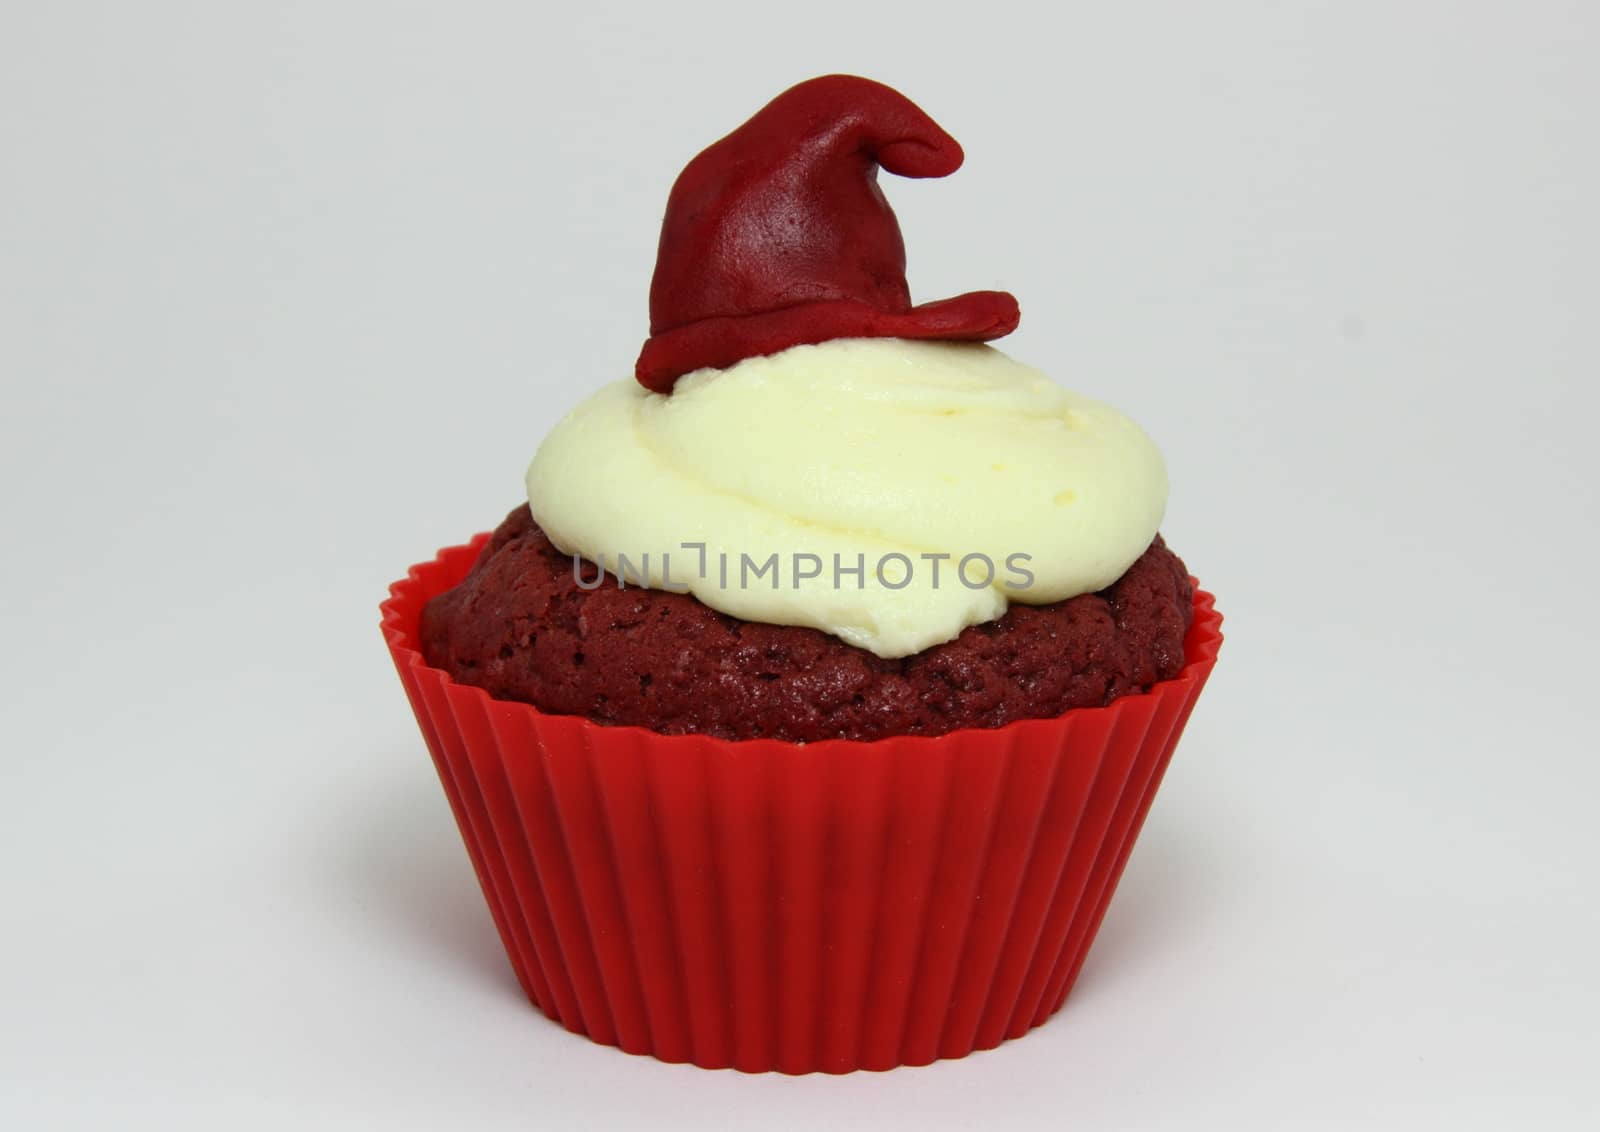 Isolated red velvet cupcake with cream cheese frosting